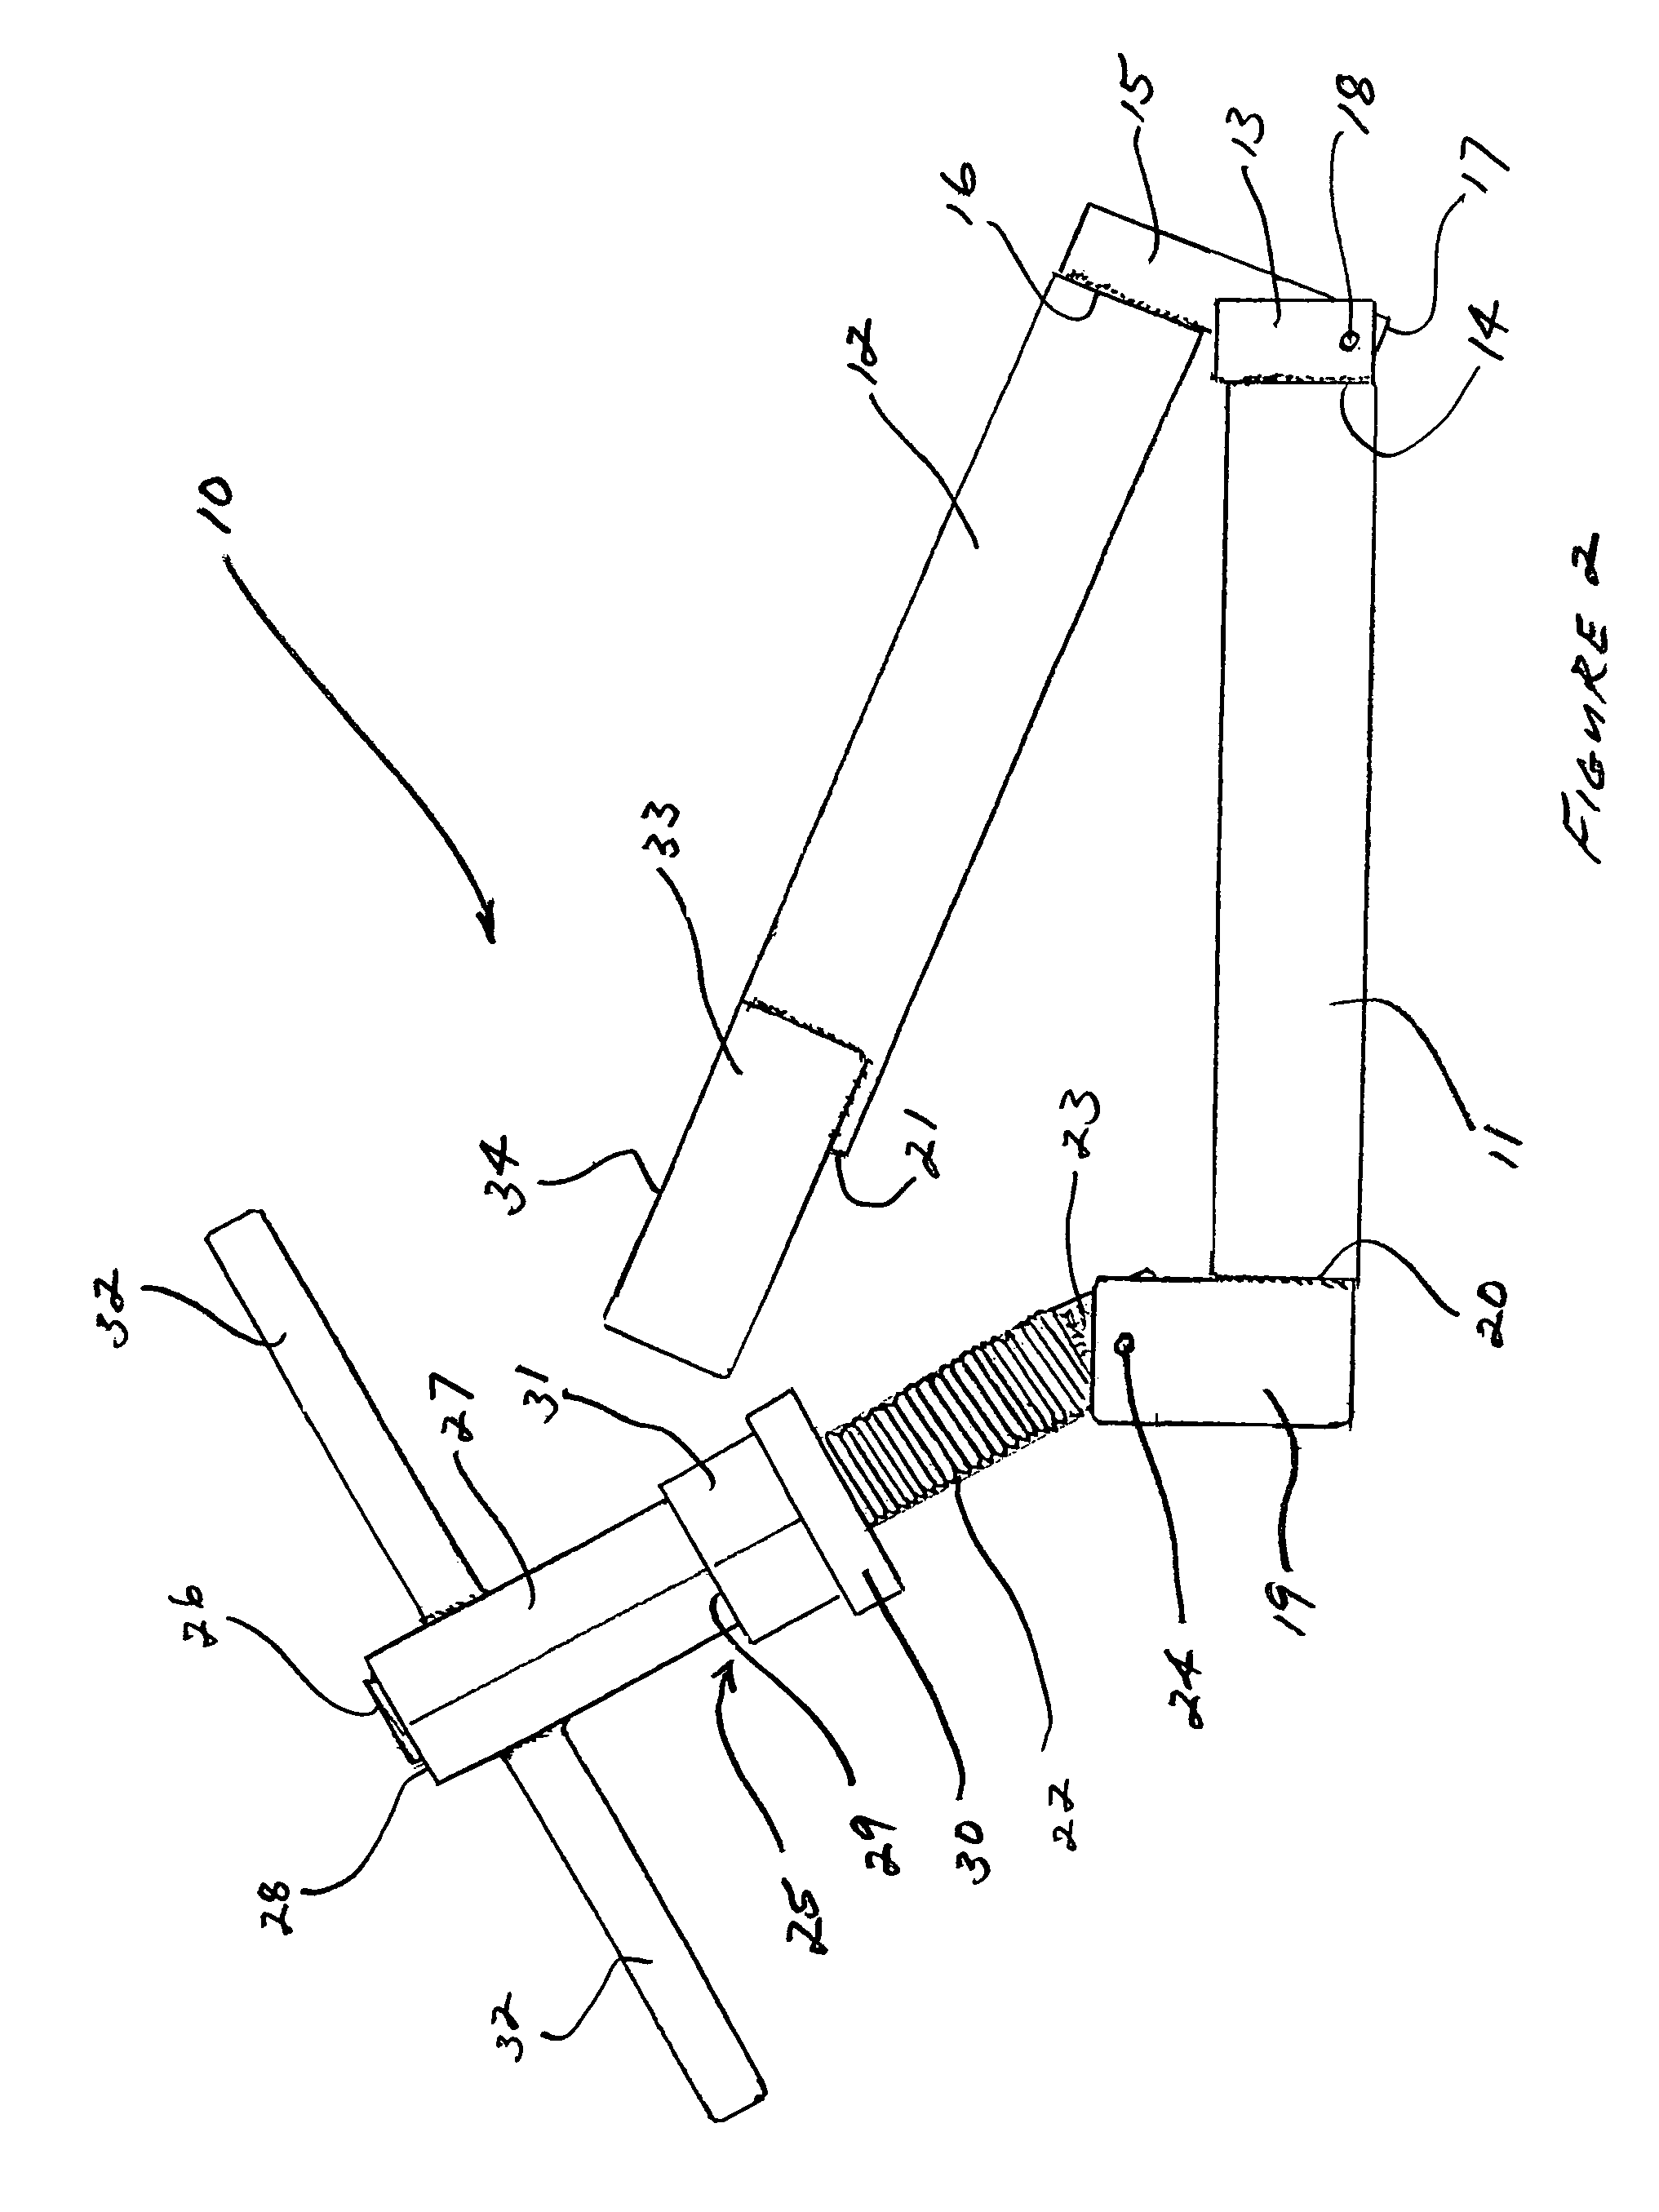 Clamp device for temporarily closing flexible pipes without pipe wall damage